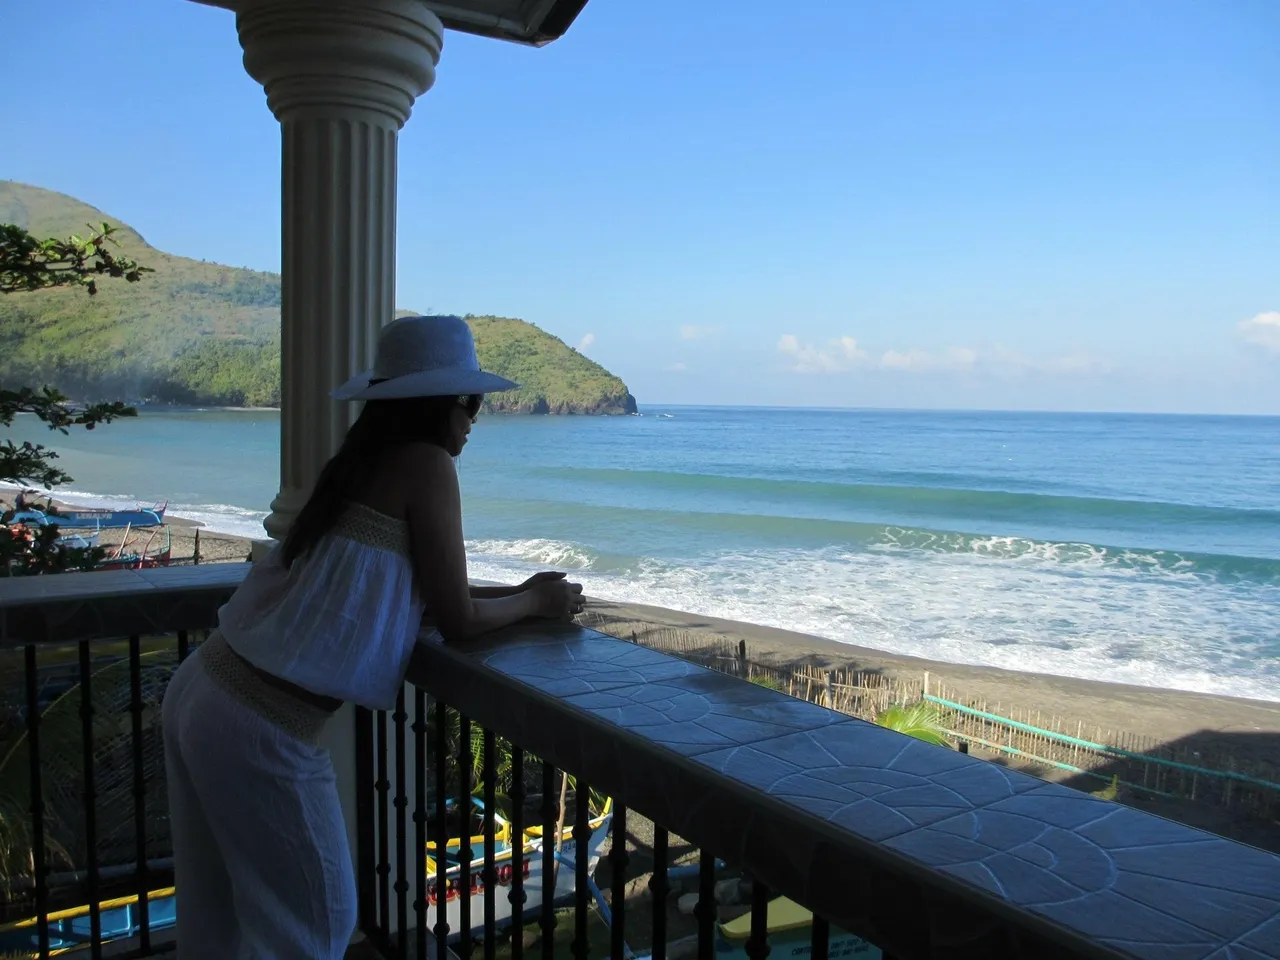 A woman standing on the balcony of her hotel room looking out at the ocean.